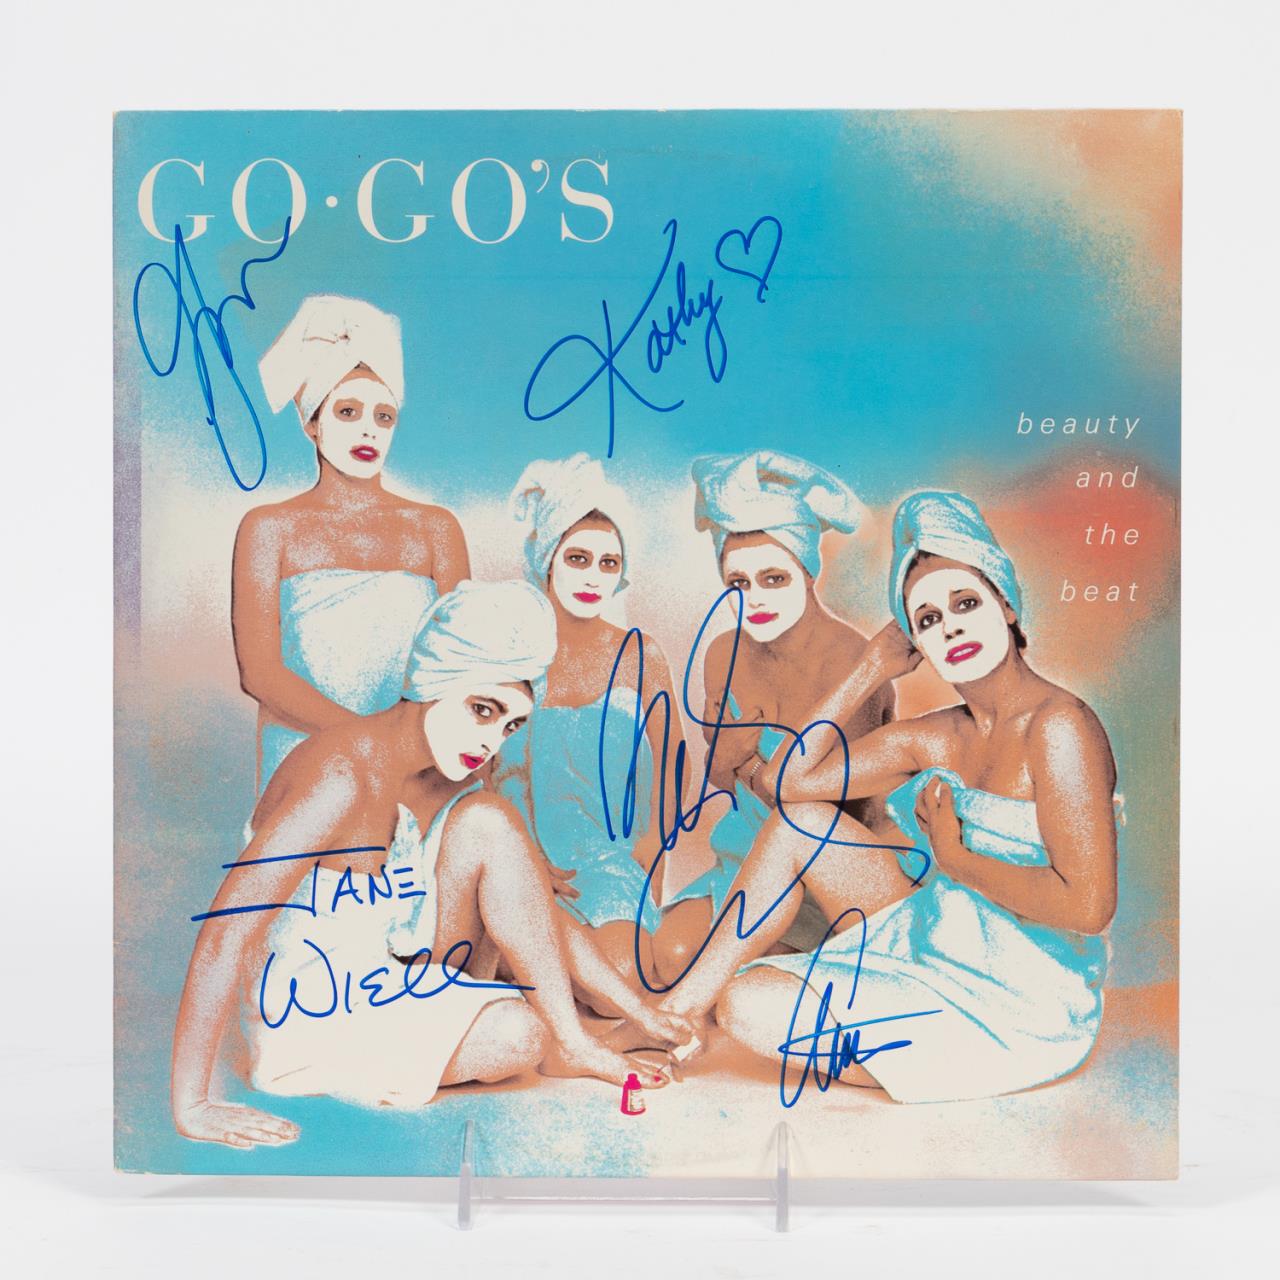 THE GO-GO'S "BEAUTY AND THE BEAT"